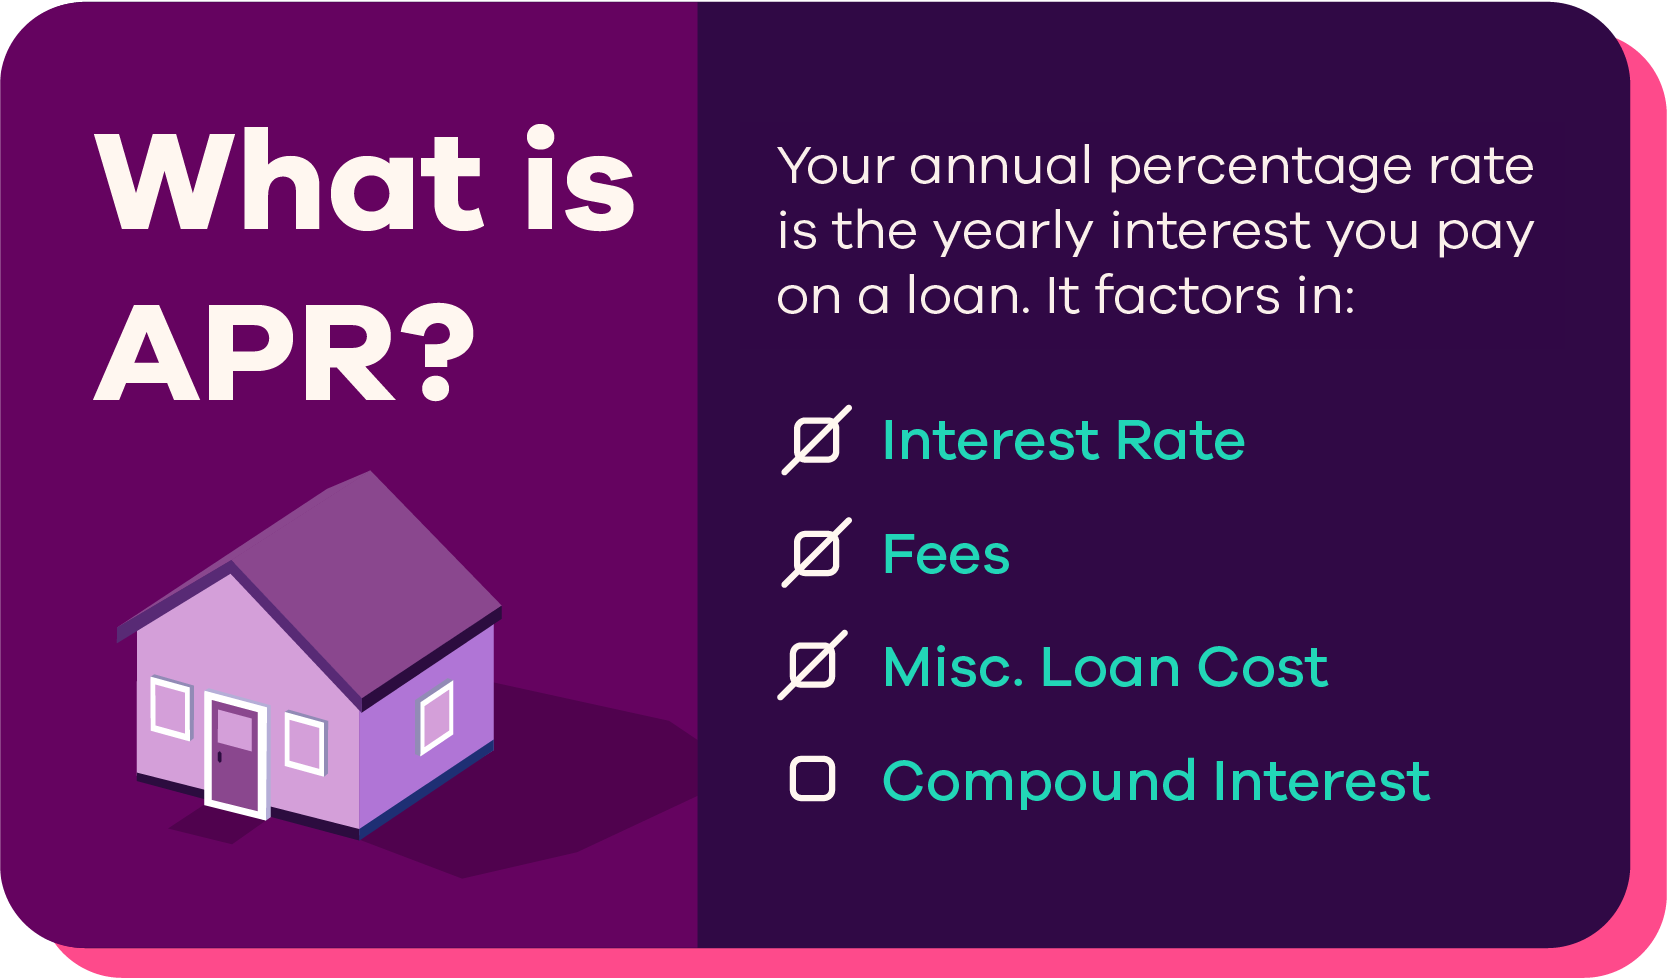 Purple graphic with a house on the left and a list with check boxes on the right that says what is APR? Your annual percentage rate is the total interest you pay on a loan. Interest rate, fees and misc. loan cost are all checked off, compound interest is not.